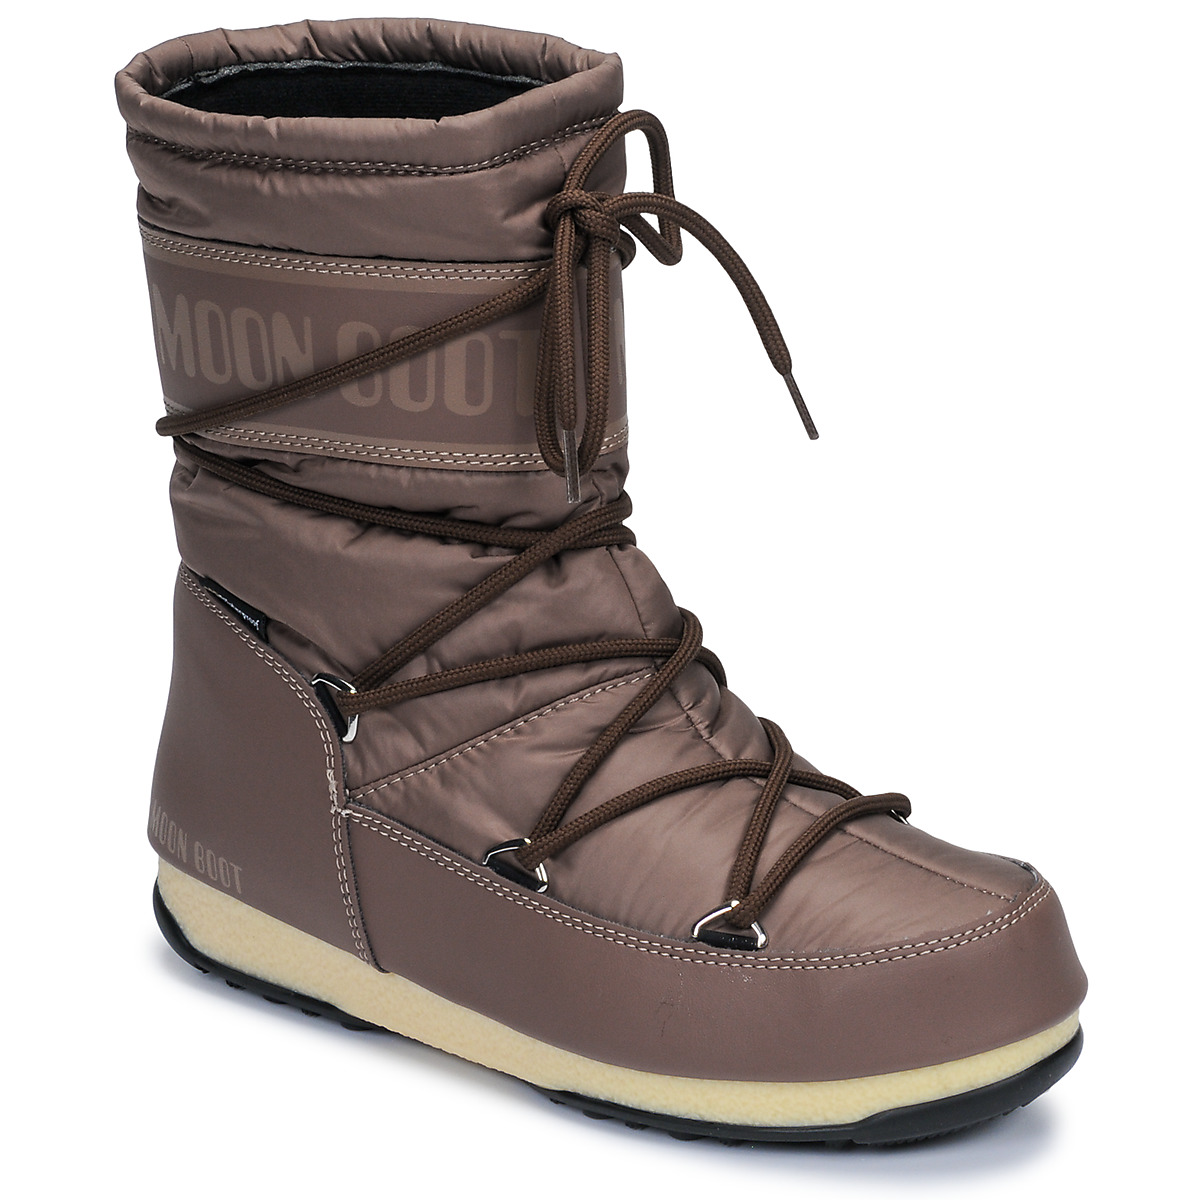 Sapatos Mulher Subscribe to Sneaker Freaker and well send you every magazine MOON BOOT MID NYLON WP Castanho